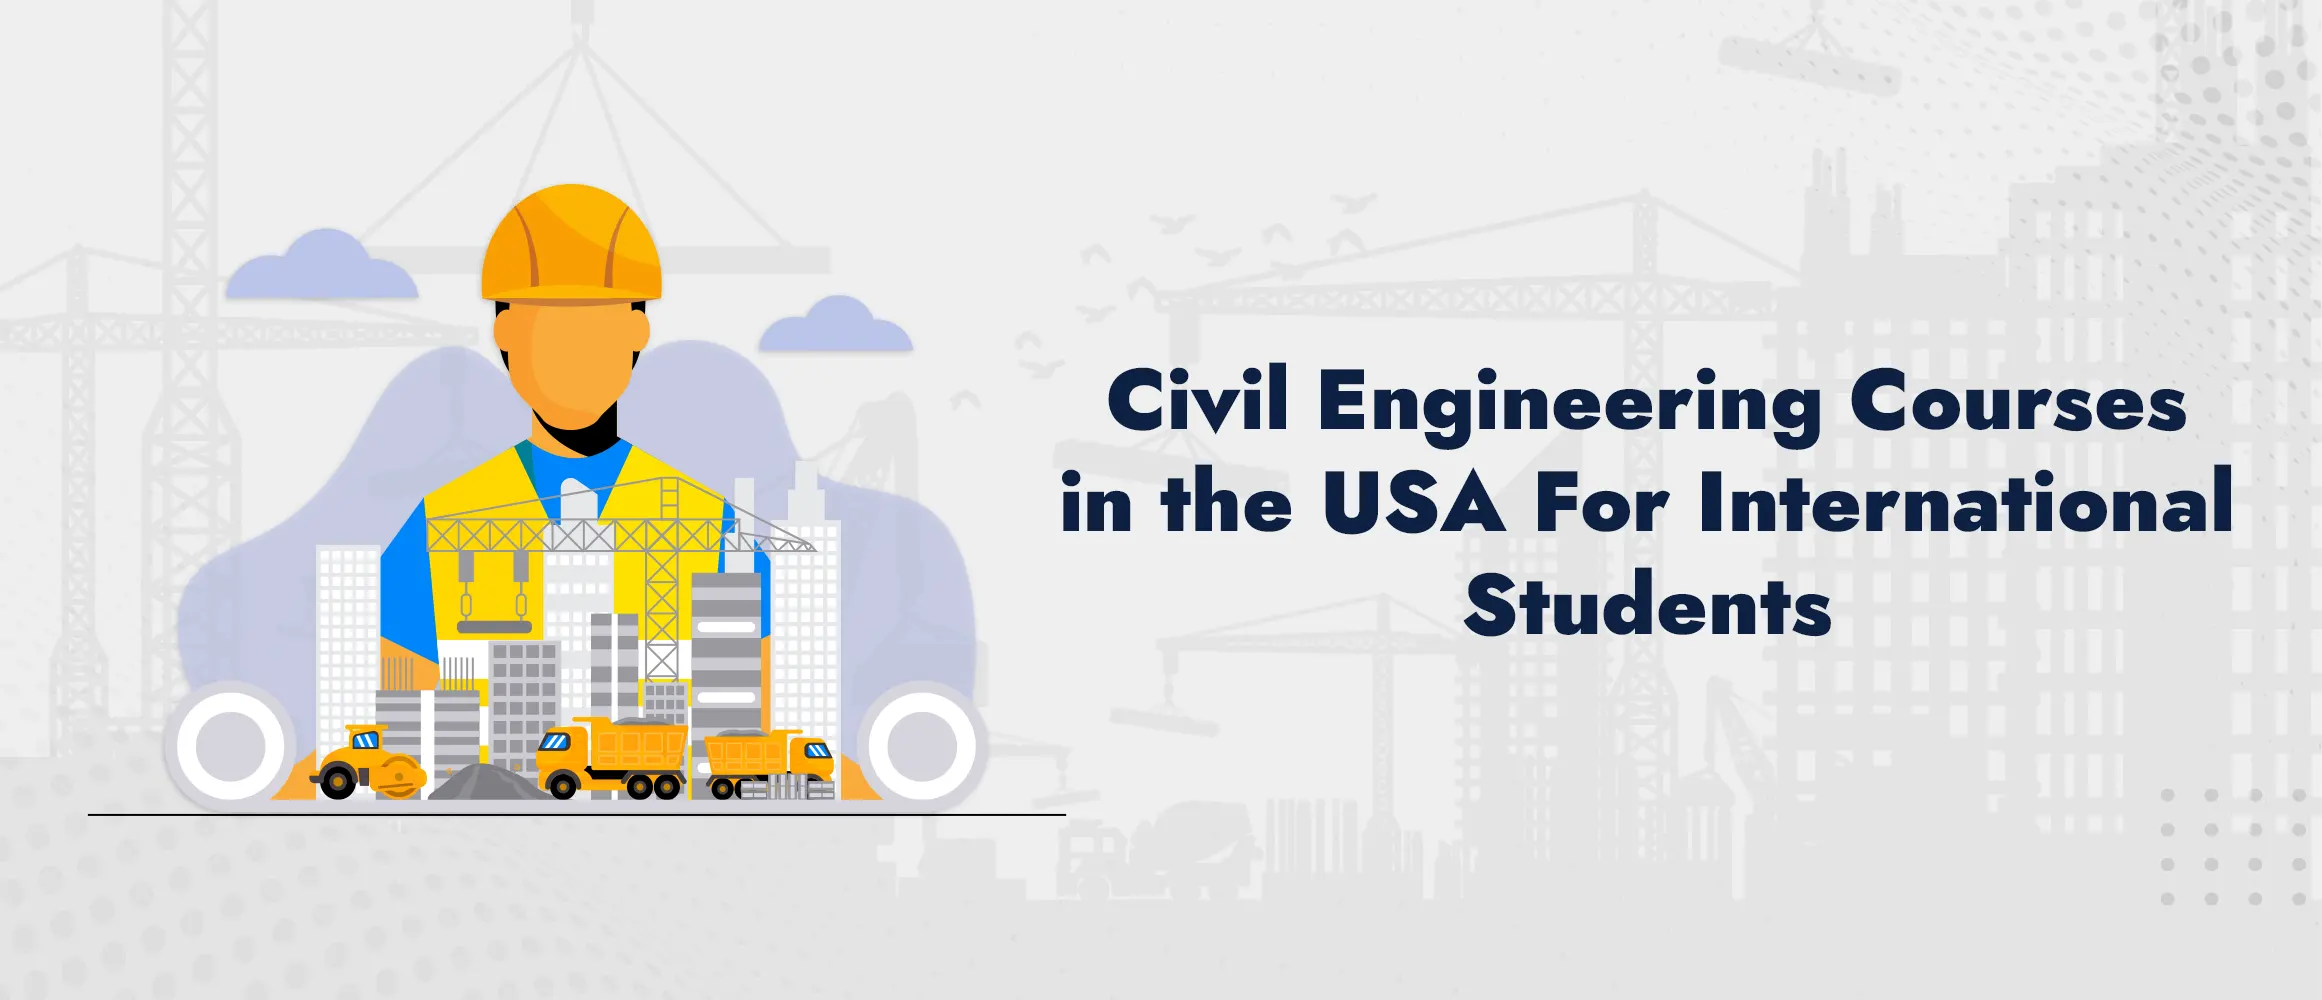 Civil Engineering Courses In the USA For International Students